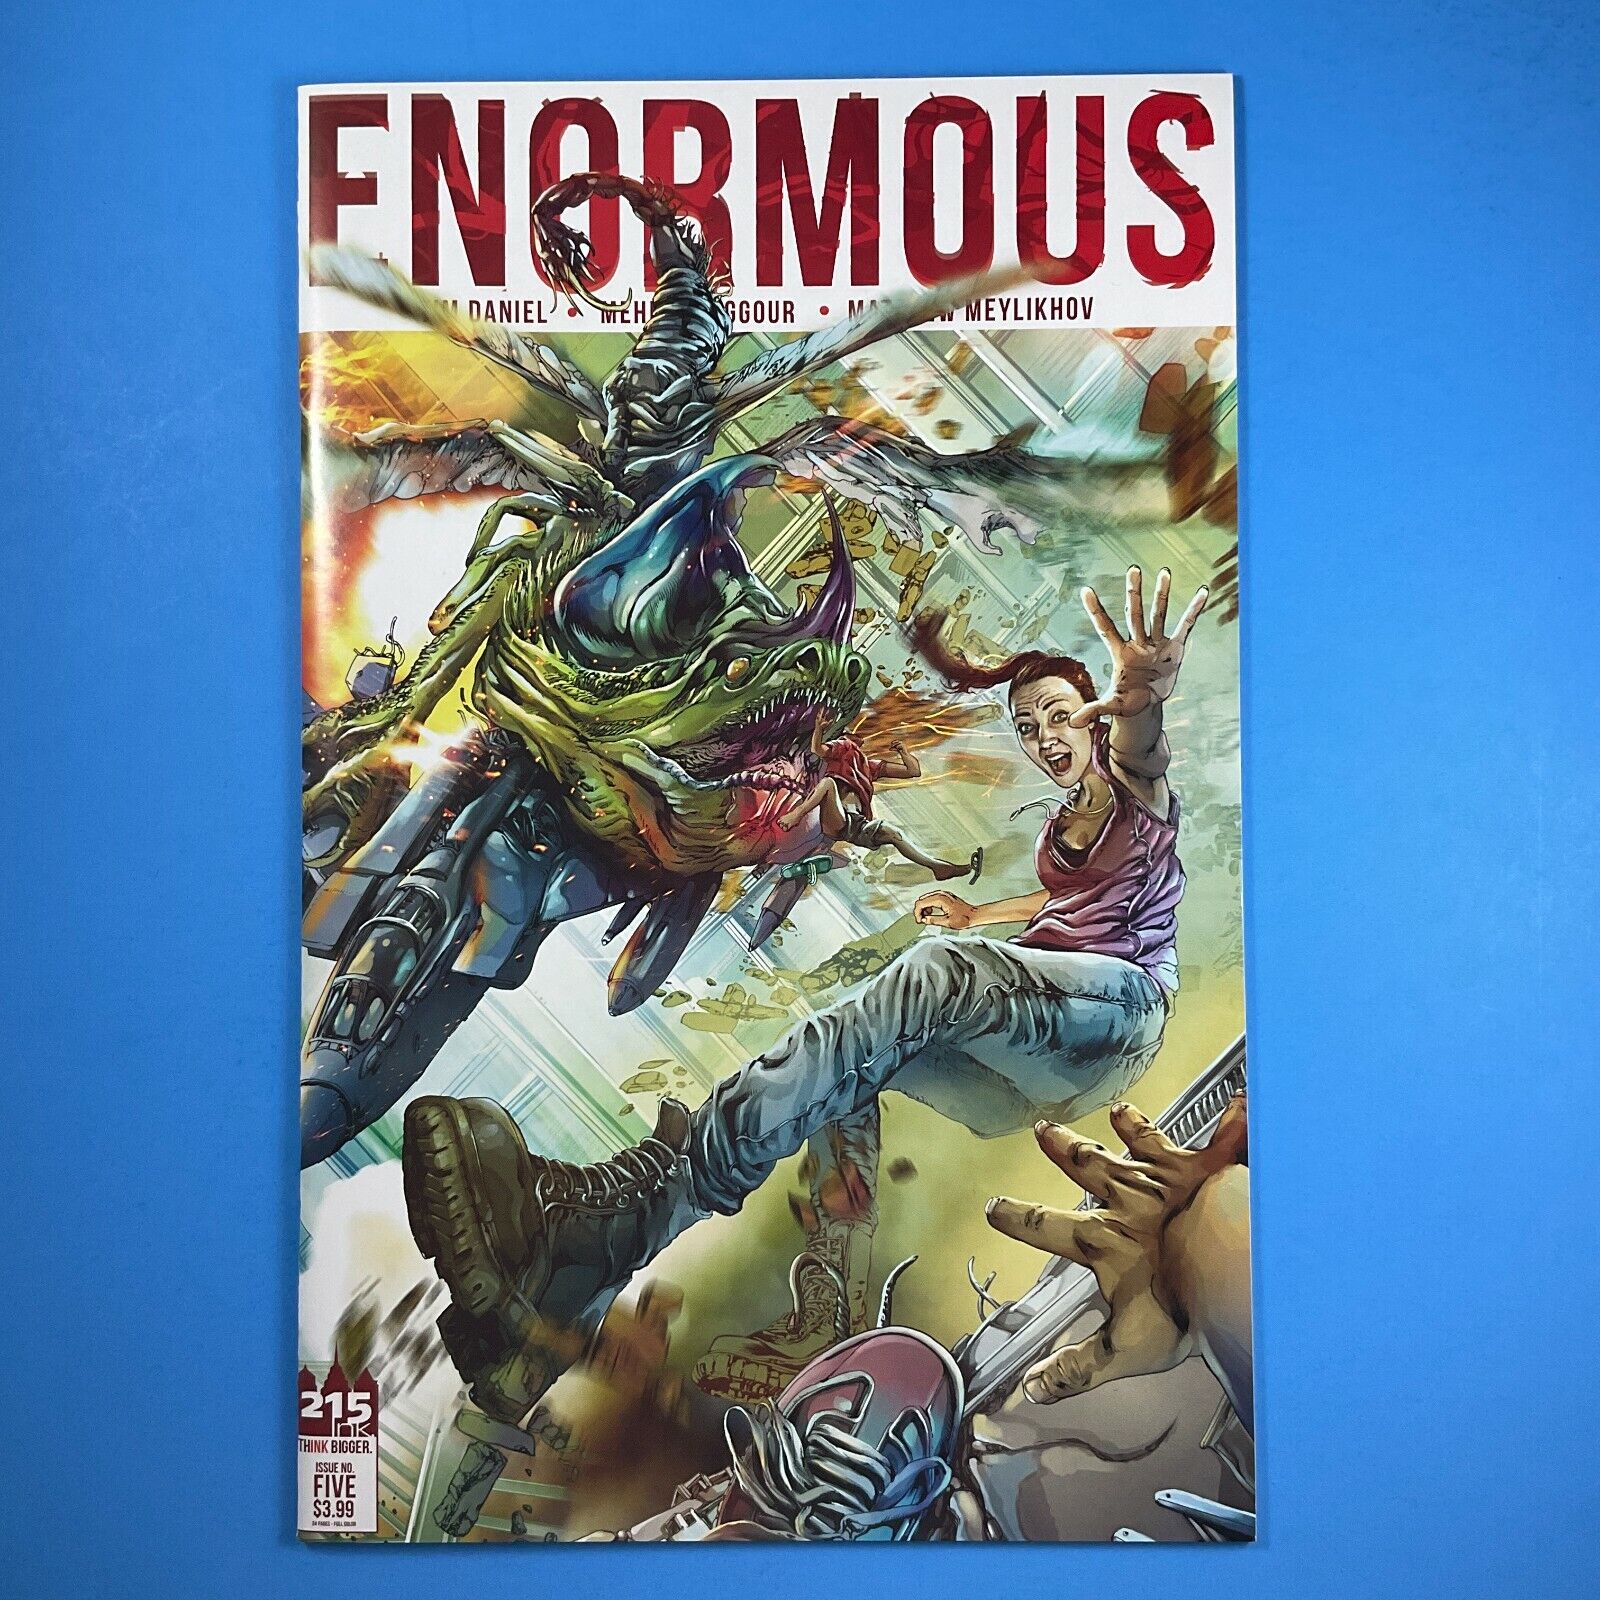 ENORMOUS #5 Cover A First Printing 2014 215Ink Comic Book 